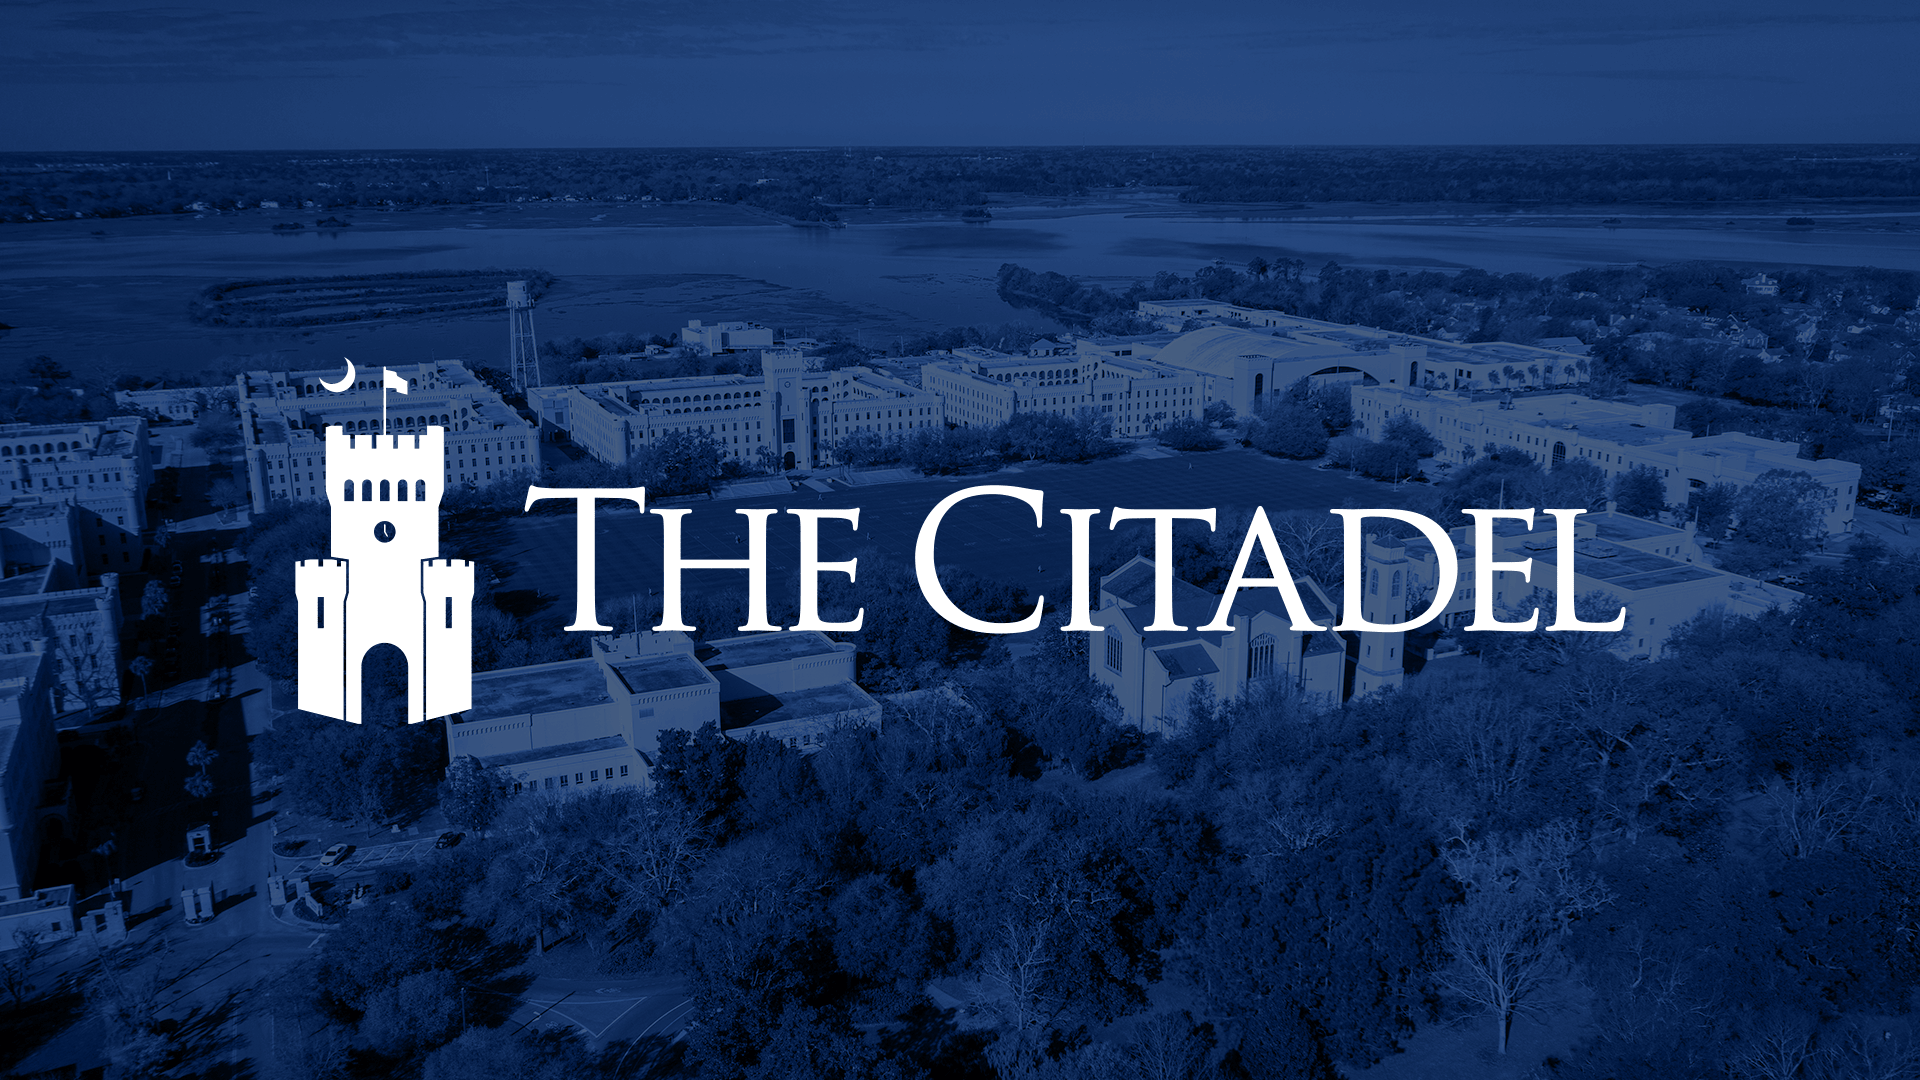 The Citadel in Charleston Receives $2.8 Million Cybersecurity Grant, 2020-01-20